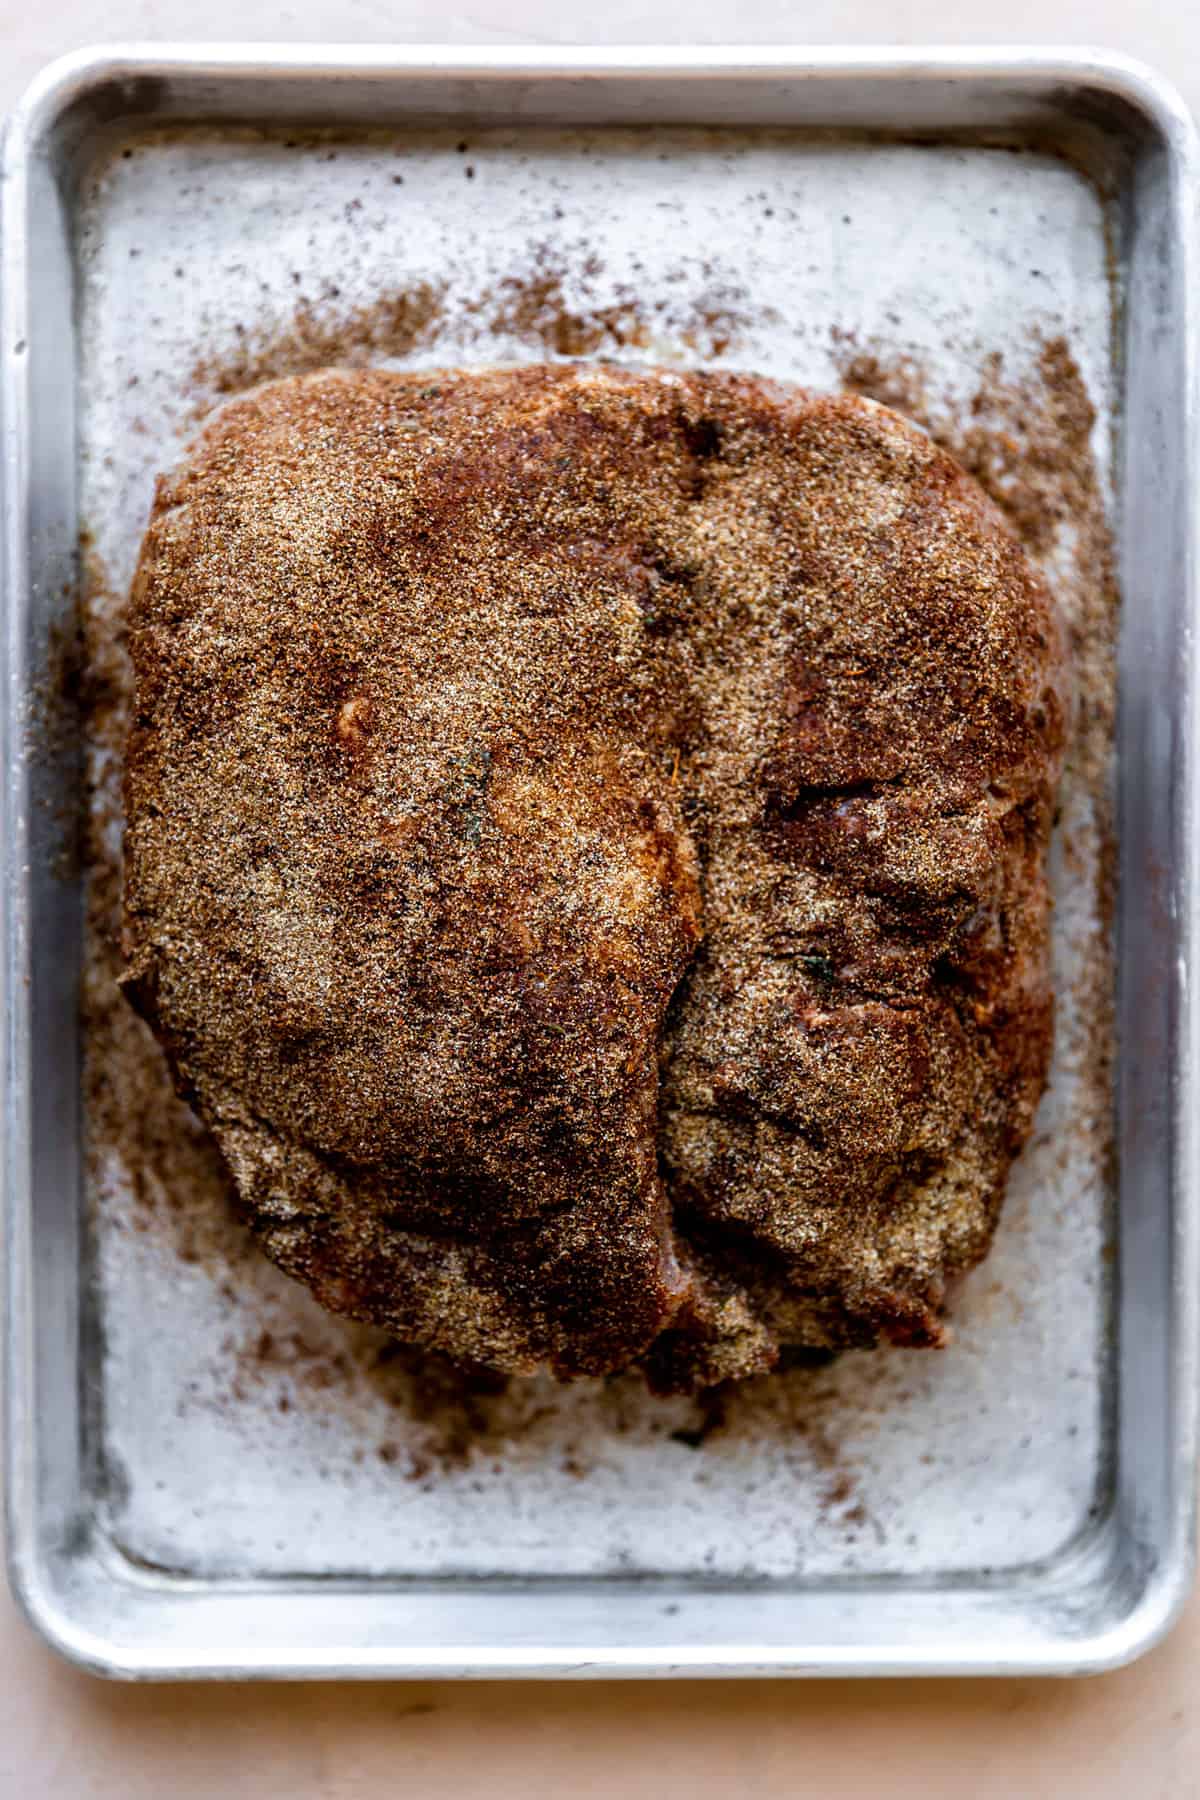 Pork shoulder on a baking sheet and covered with carnitas seasoning blend.